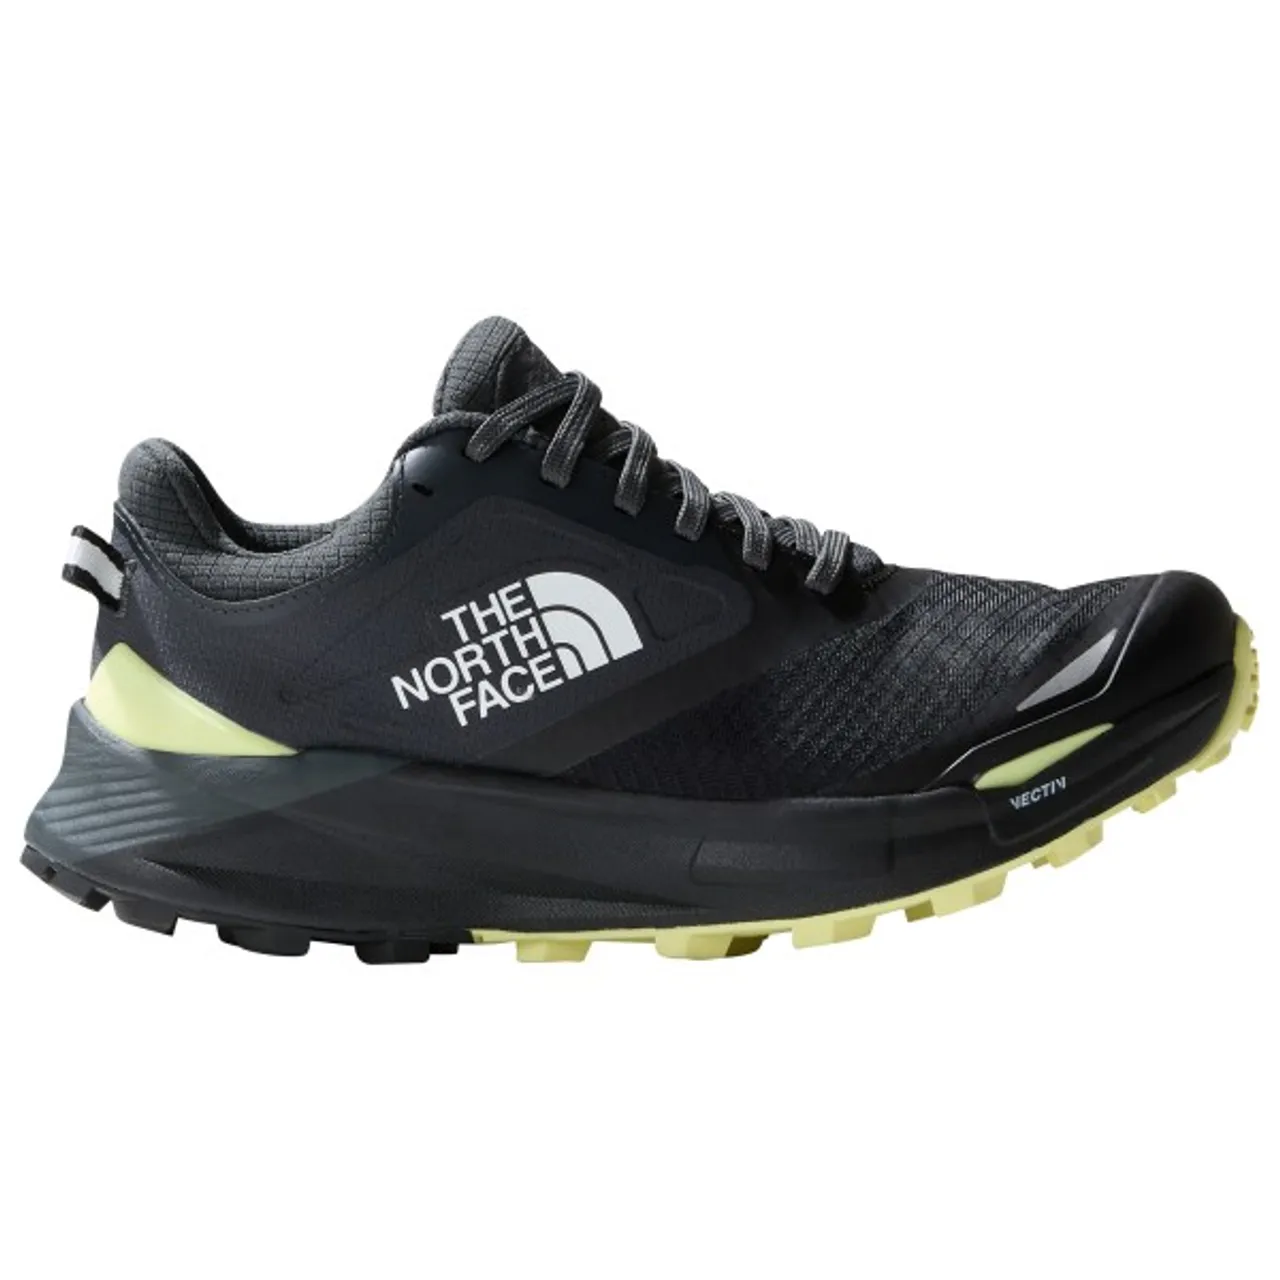 The North Face - Women's Vectiv Enduris 3 Futurelight - Trail running shoes